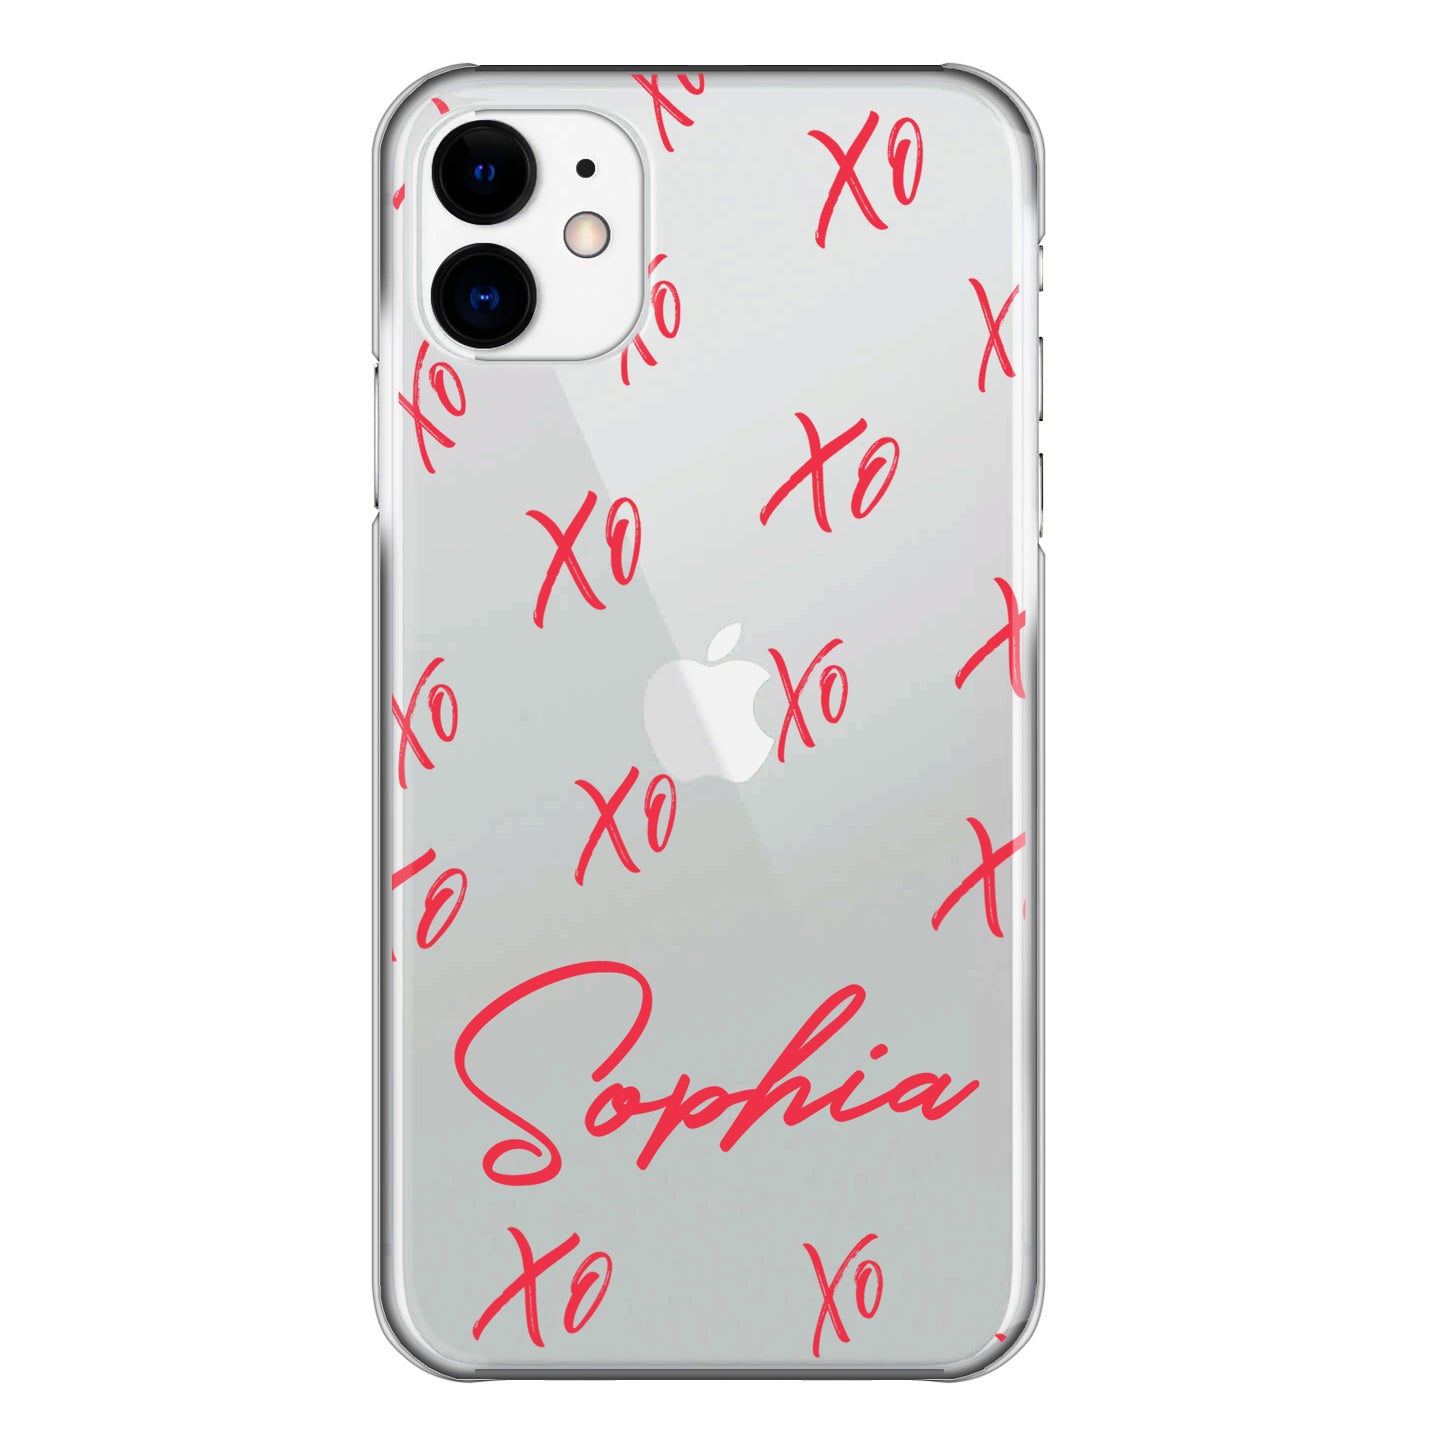 Personalised Motorola Phone Hard Case with Hugs/Kisses and Stylish Red Text